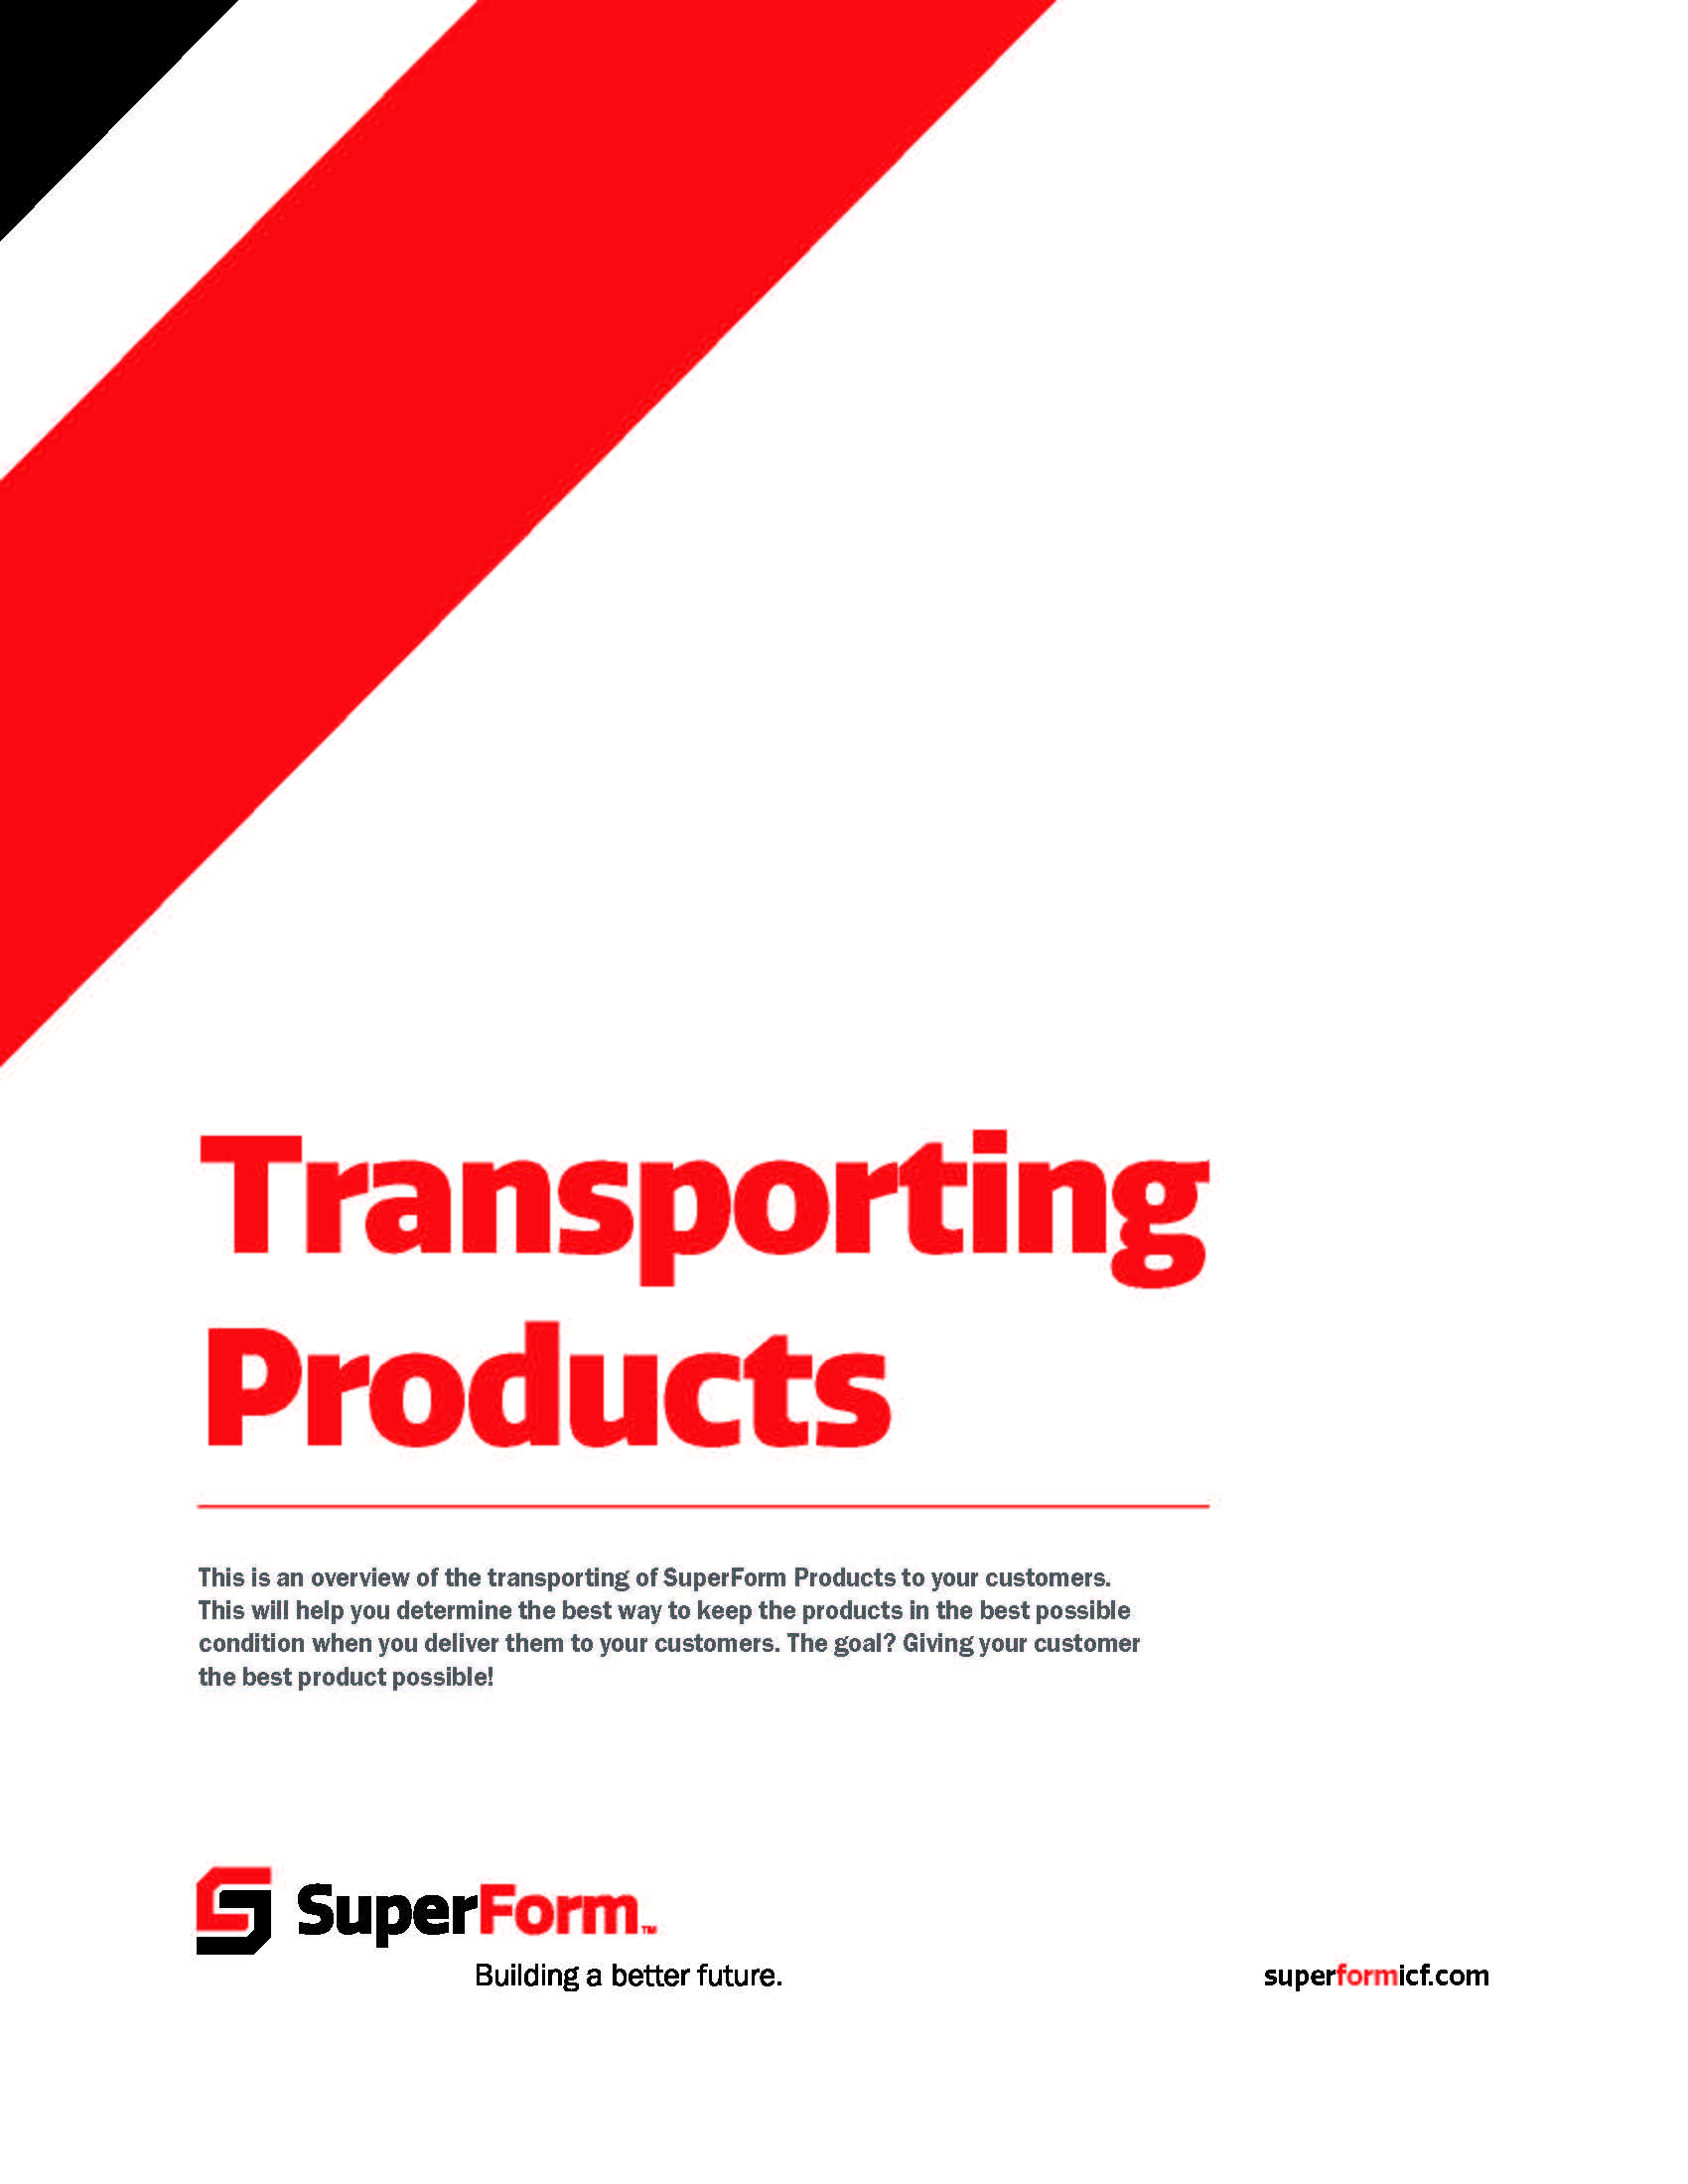 SuperForm_Transporting Products_120821_FINAL